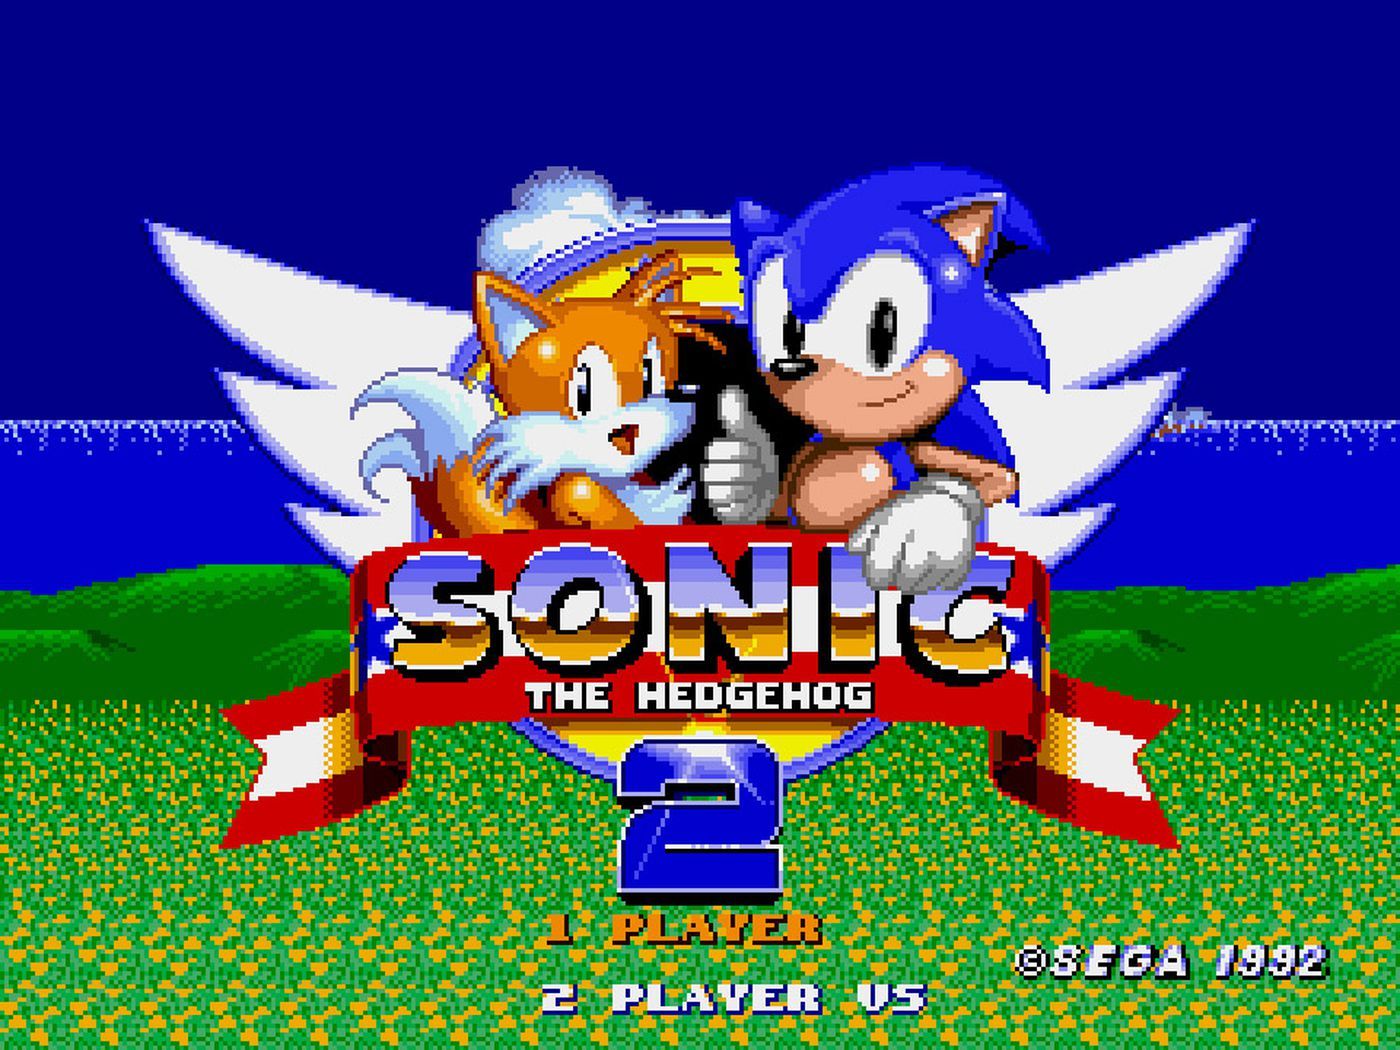 Sonic the Hedgehog 2 for Nintendo Switch adds new features to the game